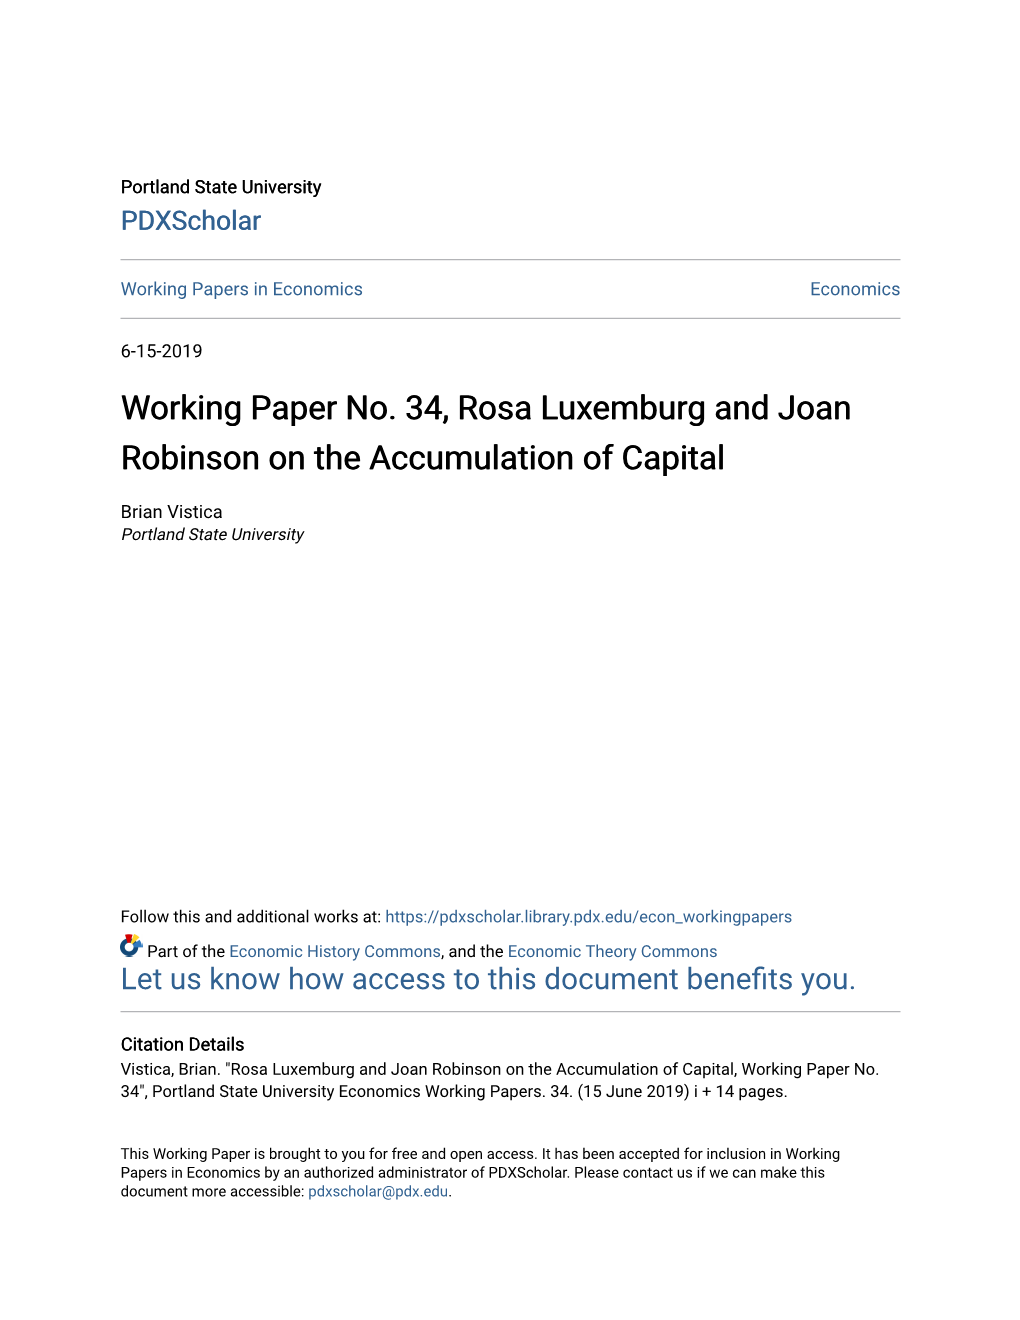 Working Paper No. 34, Rosa Luxemburg and Joan Robinson on the Accumulation of Capital